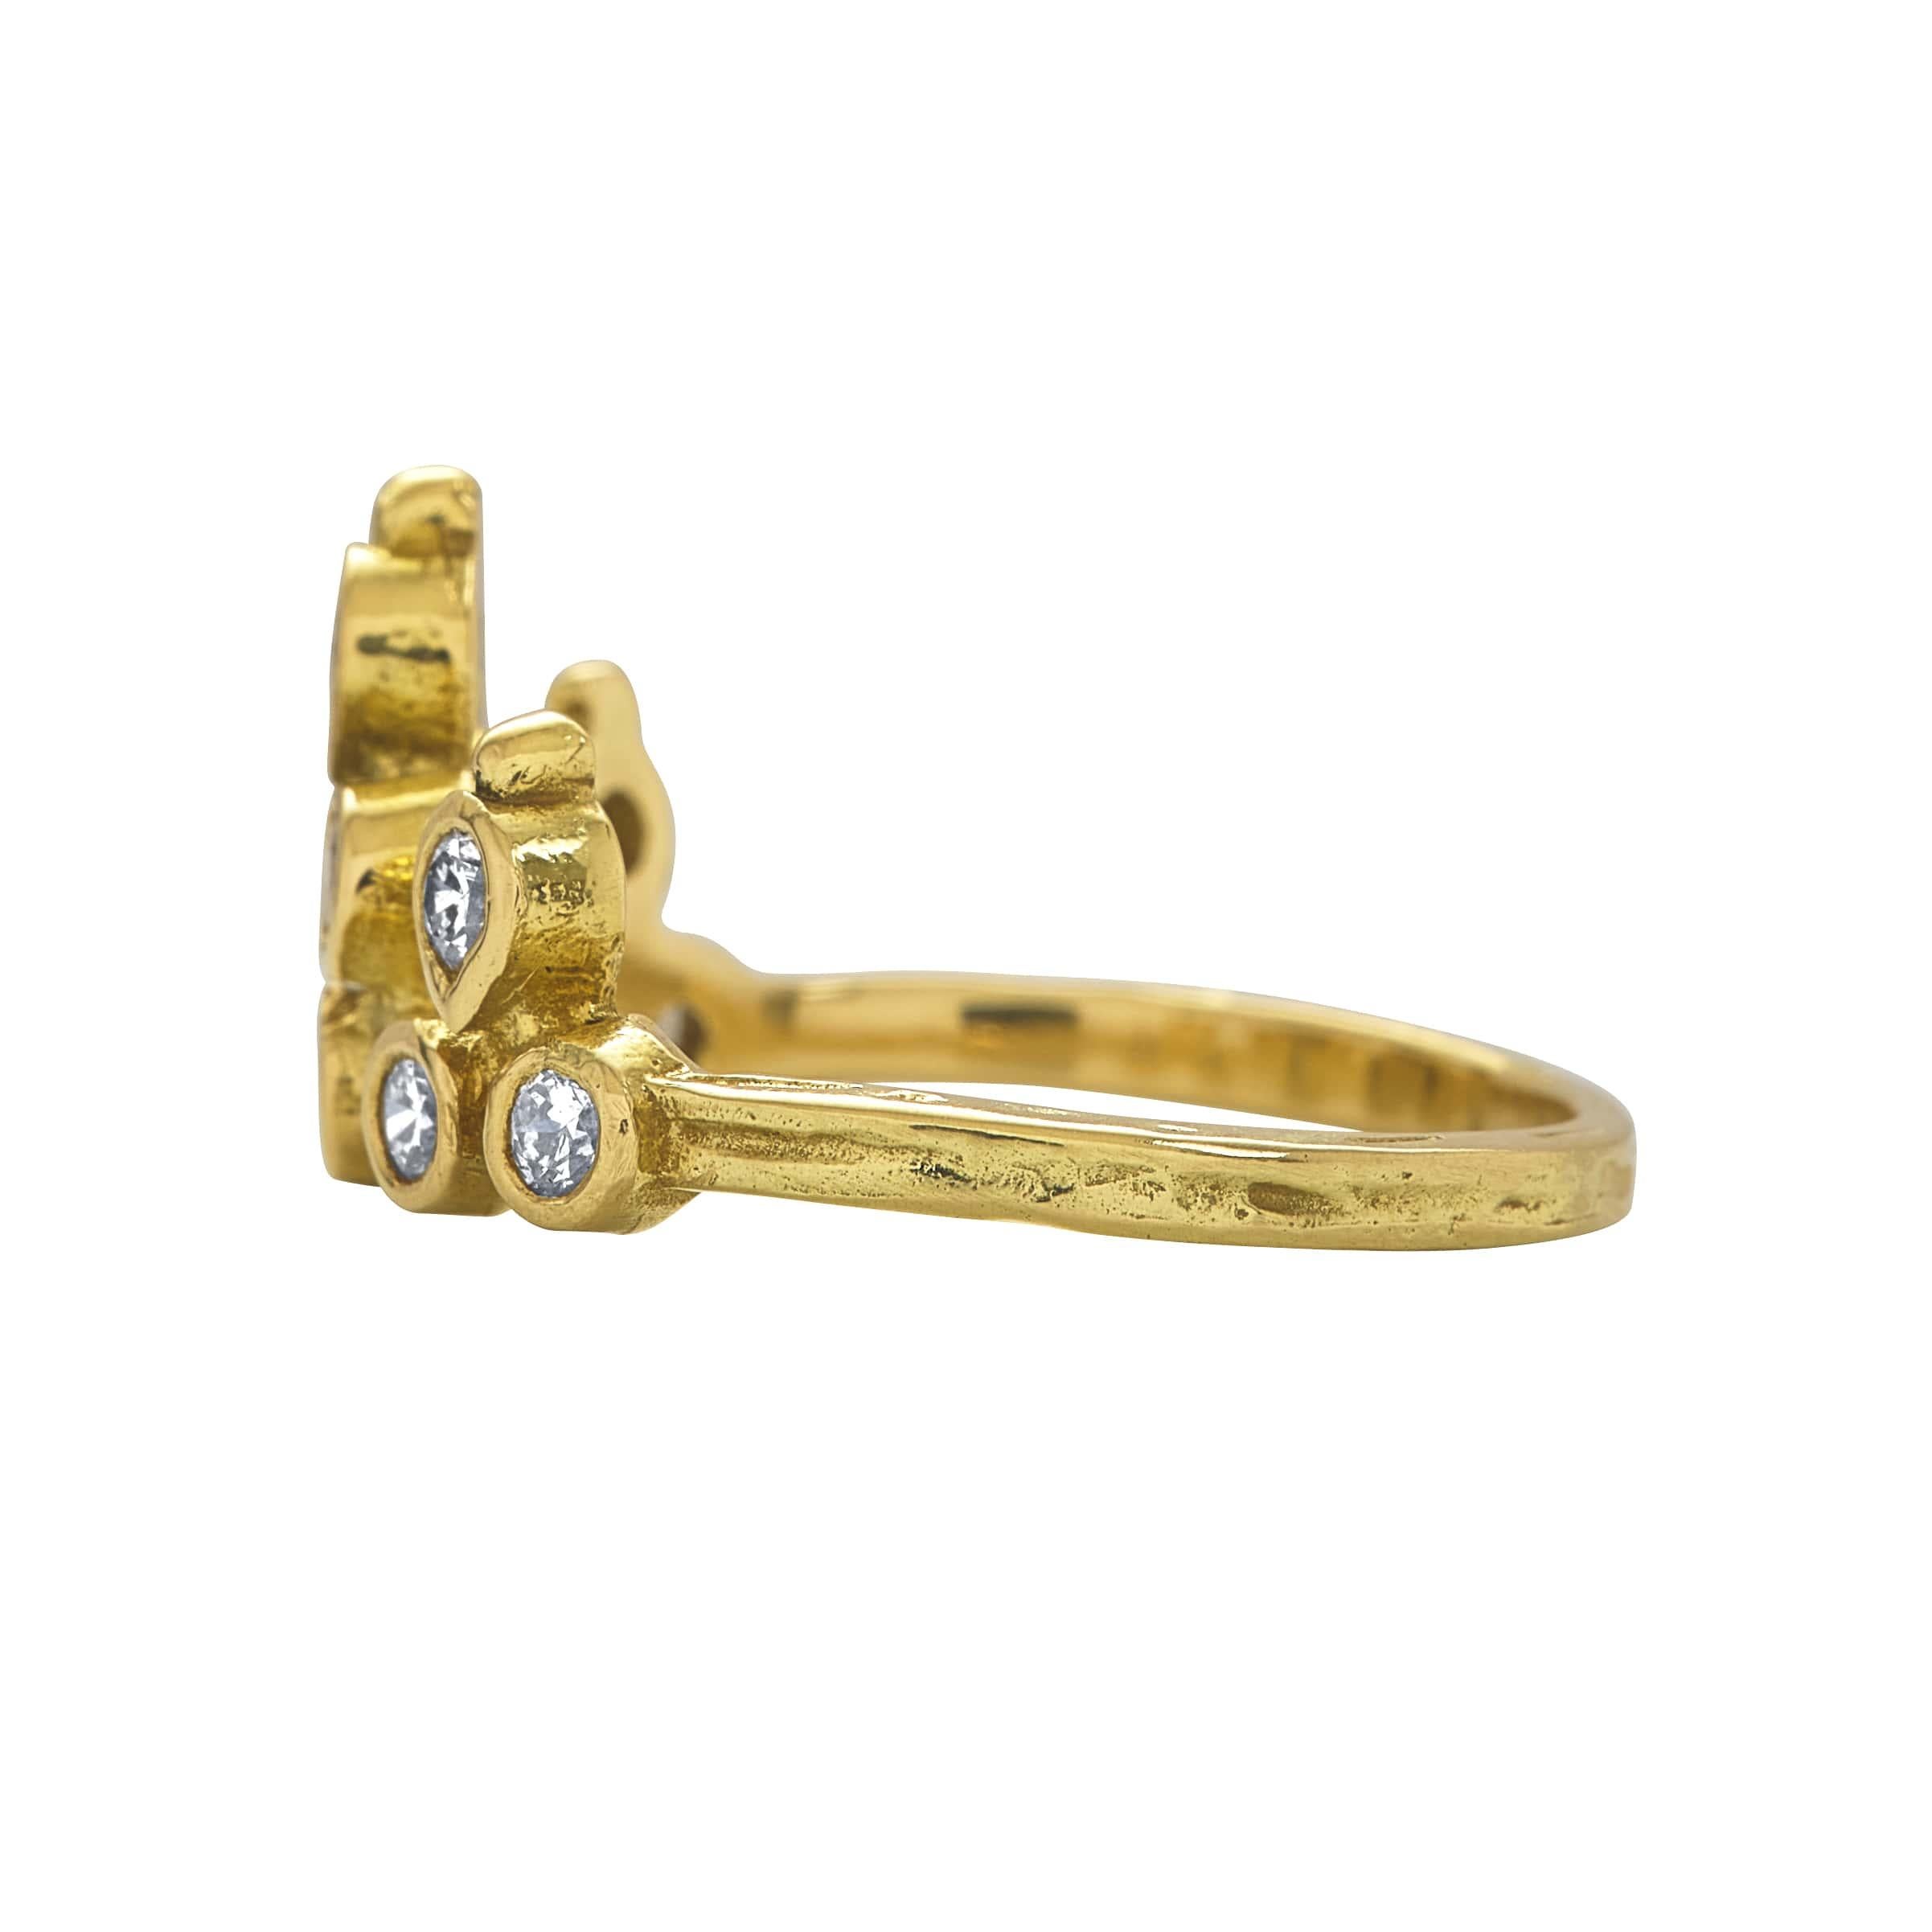 A symbol that you are the ruler of your own world, an 18k yellow gold tiara-like shape is formed by 10 bezel-set brilliant-cut colorless diamonds. This unique ring can be worn alone or in a stack, and in either direction on the finger. It makes the